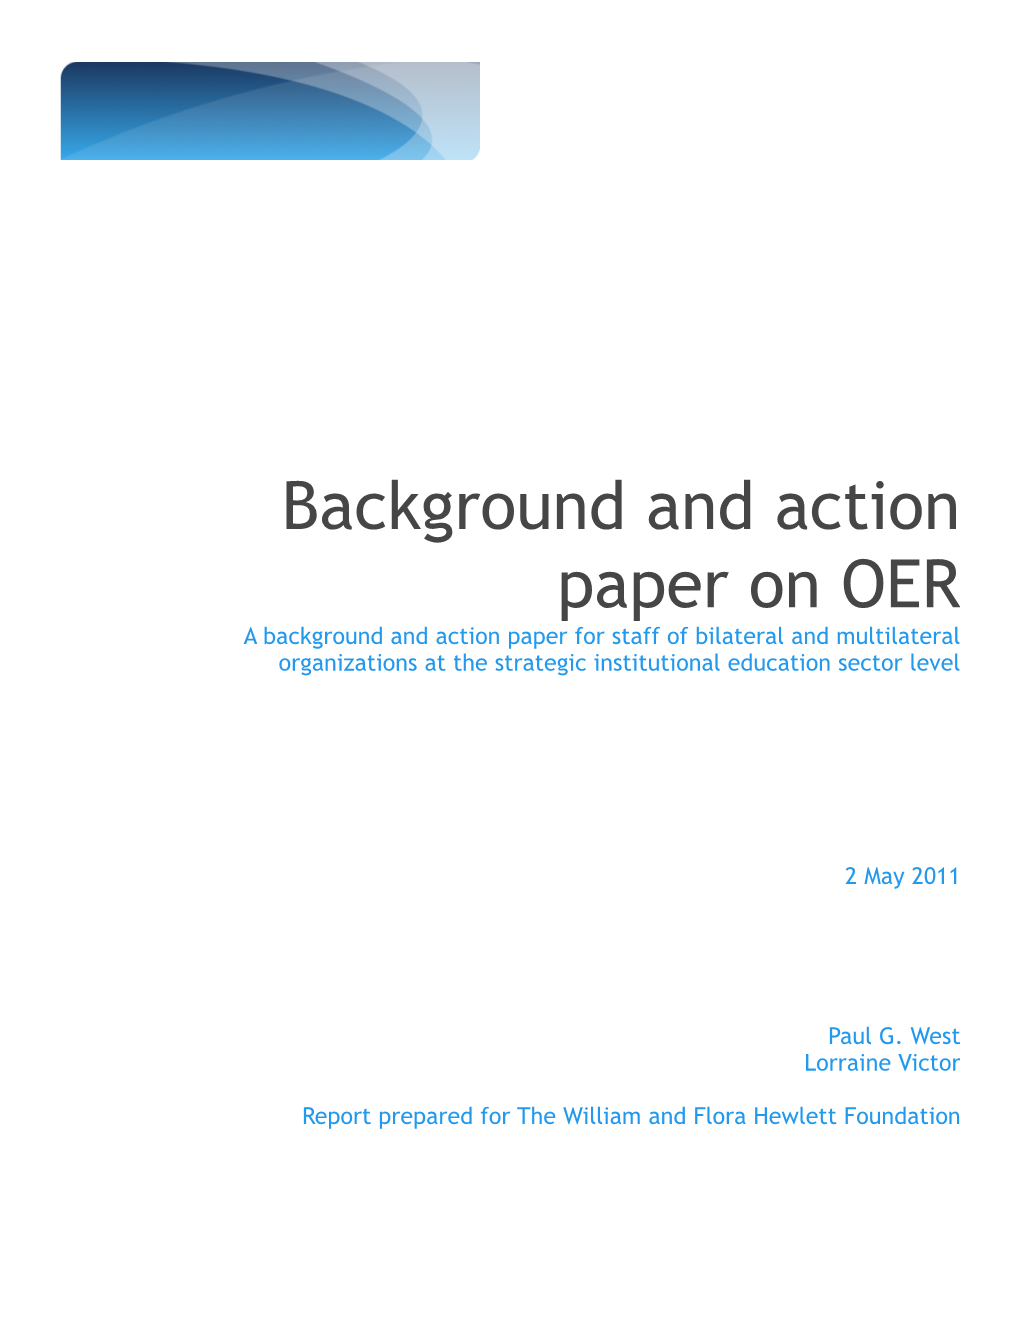 Background and Action Paper on OER Ed01